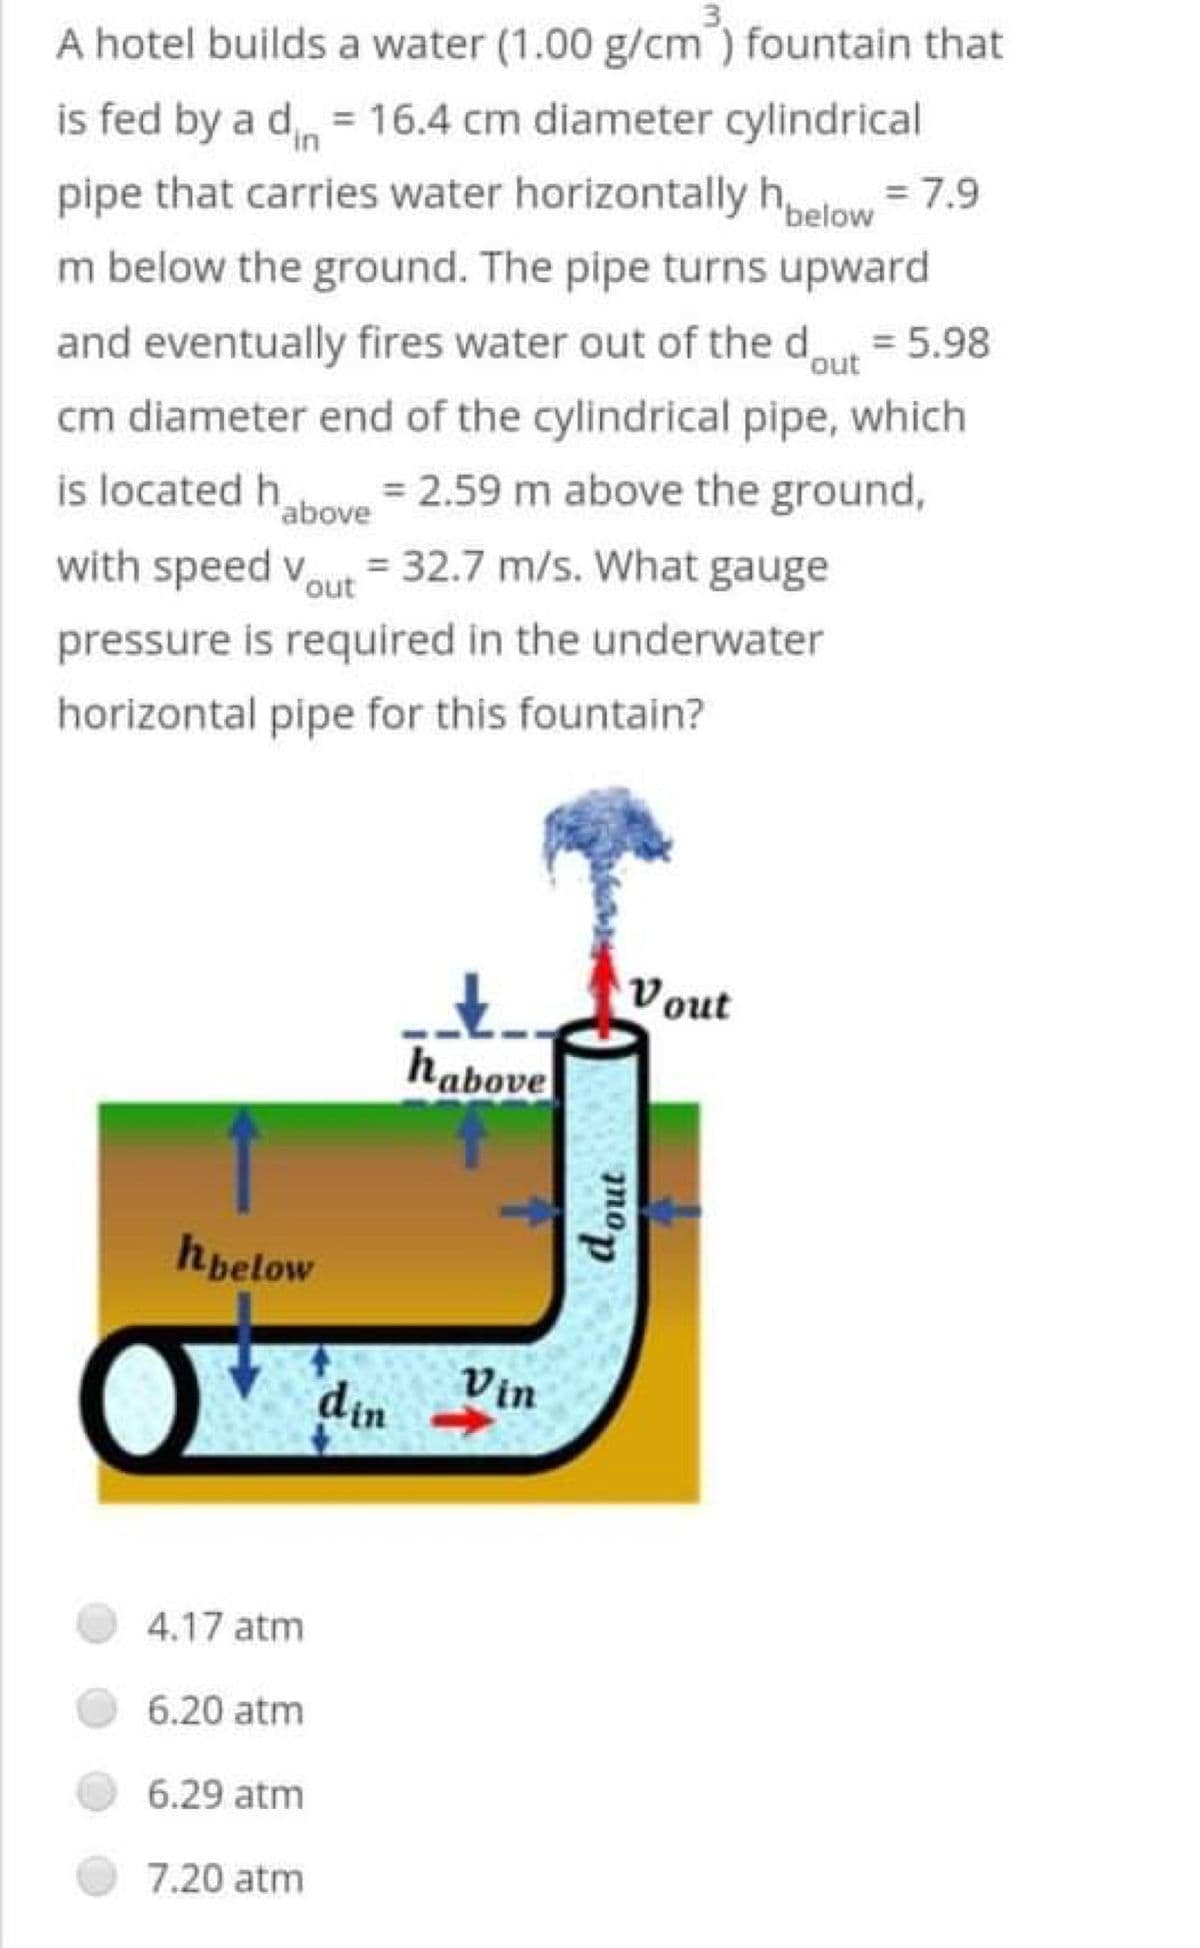 A hotel builds a water (1.00 g/cm) fountain that
is fed by a d = 16.4 cm diameter cylindrical
pipe that carries water horizontally hbelow = 7.9
m below the ground. The pipe turns upward
and eventually fires water out of the dout = 5.98
cm diameter end of the cylindrical pipe, which
is located h = 2.59 m above the ground,
with speed Vout = 32.7 m/s. What gauge
pressure is required in the underwater
horizontal pipe for this fountain?
above
Vout
habove
hbelow
4.17 atm
6.20 atm
6.29 atm
7.20 atm
Vin
mop